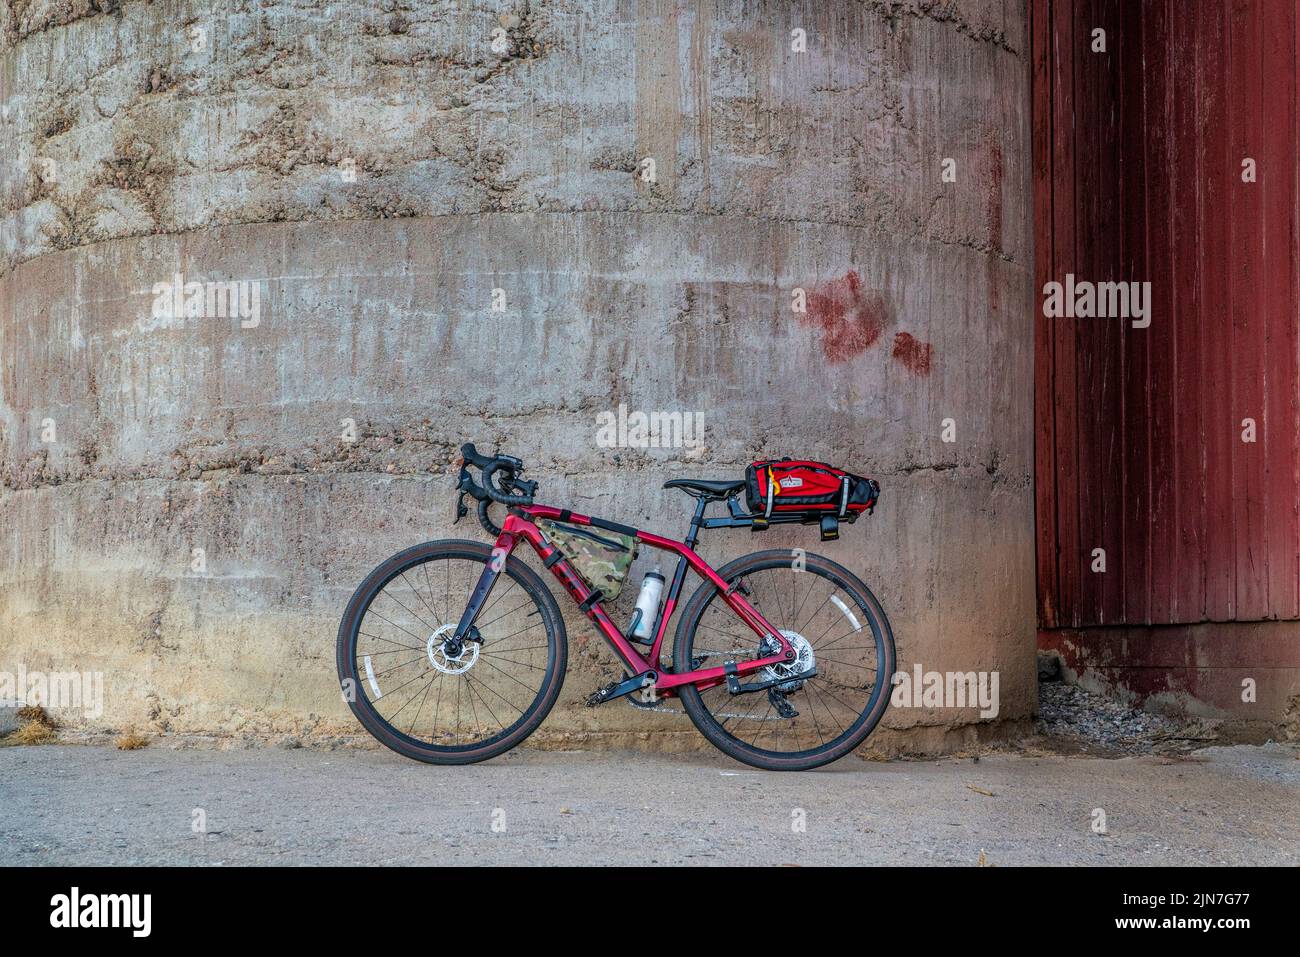 Fort Collins, CO, USA - April 9, 2022: Checkpoint SL6 gravel bike by Trek with seat post rack and trunk bag by Arkel and Oveja Negra frame bag at old Stock Photo